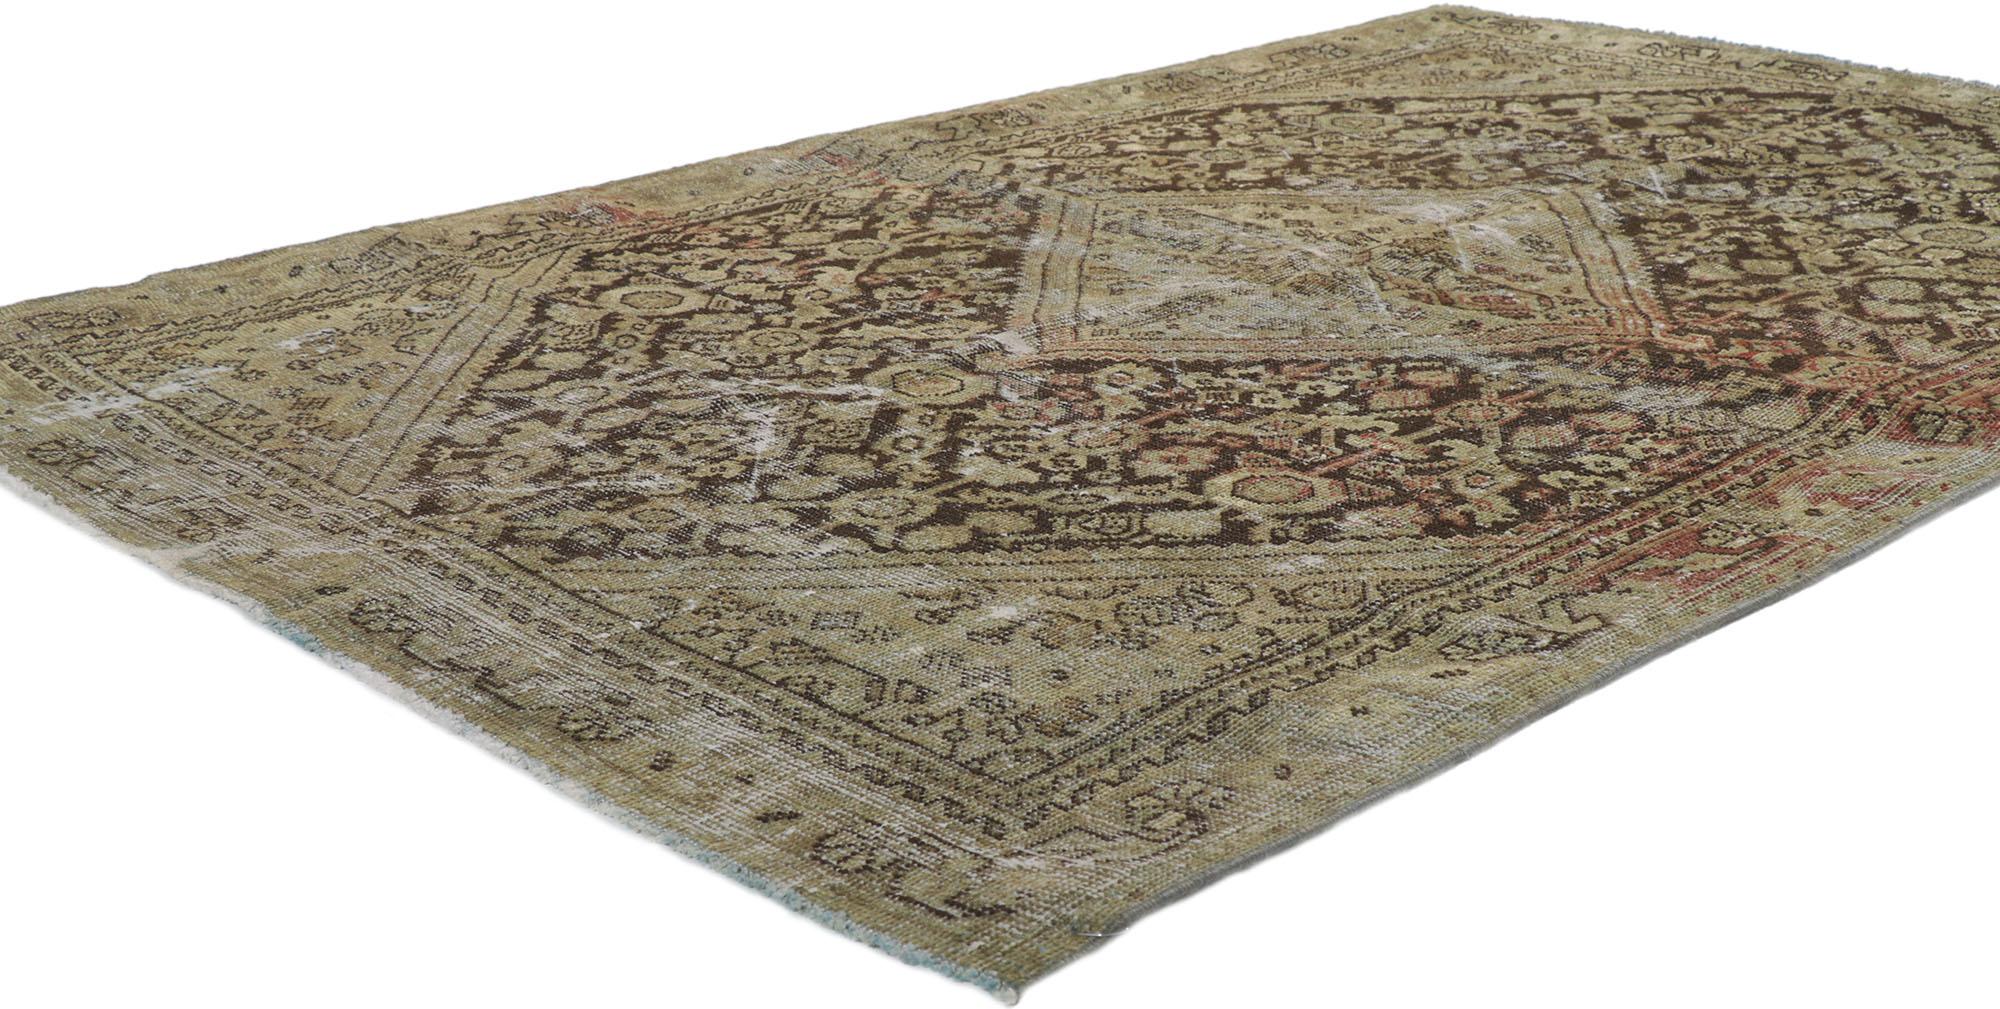 60977 Worn-In Distressed Antique Persian Mahal rug 04'01 x 06'00. Warm and inviting with a lovingly time-worn composition, this hand-knotted wool distressed antique Persian Mahal rug will take on a curated lived-in look that feels timeless while